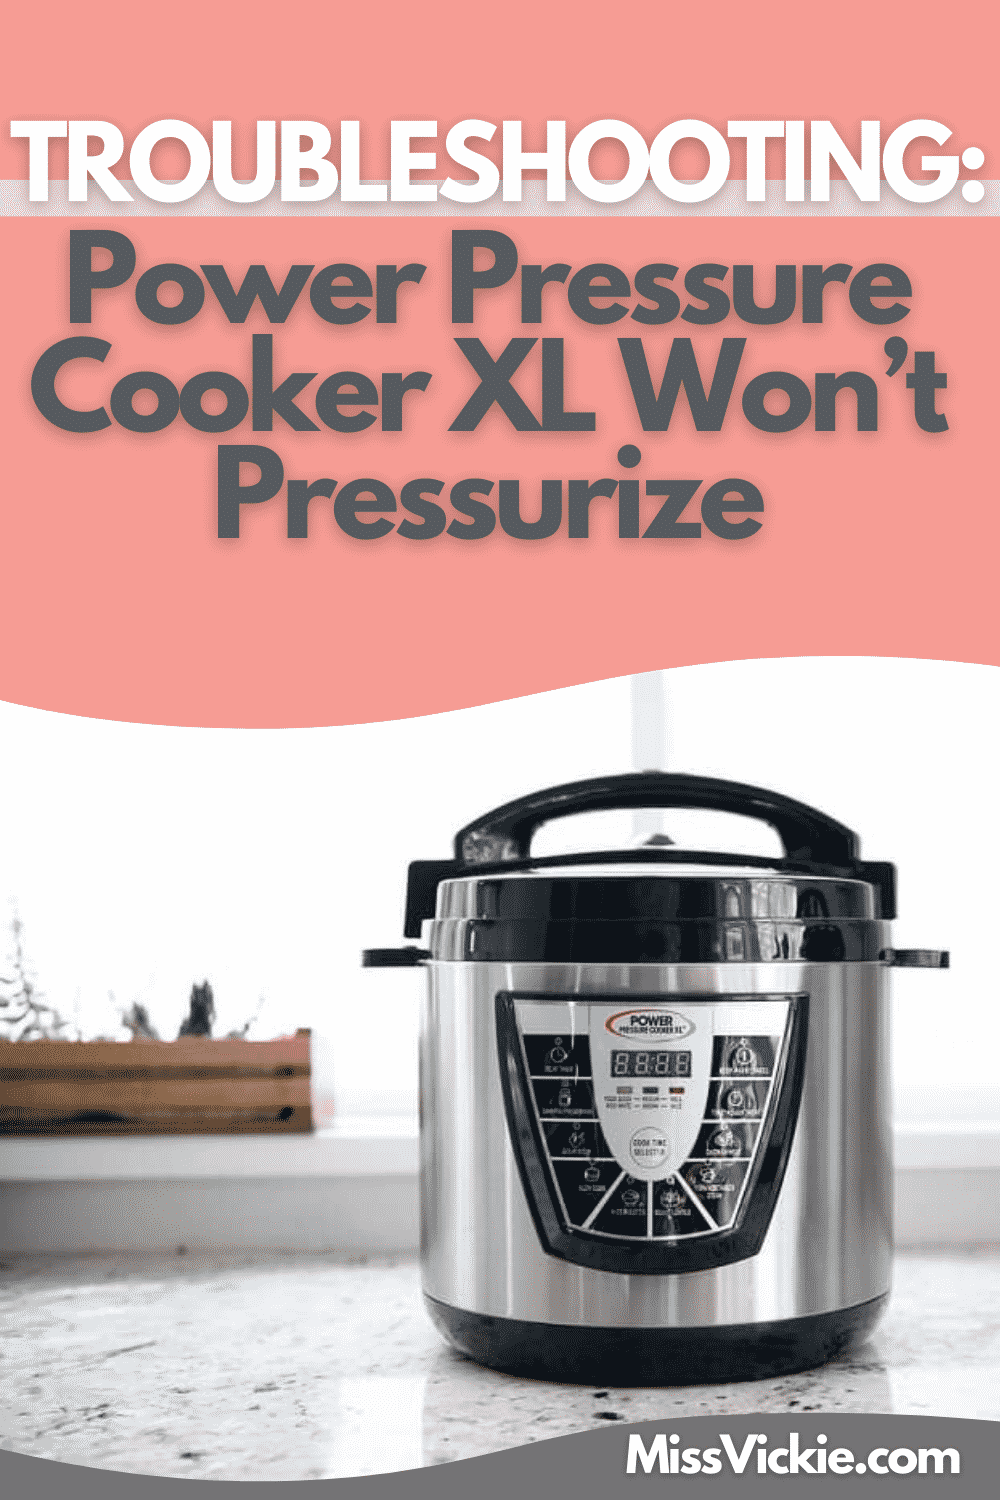 https://missvickie.com/wp-content/uploads/2019/11/troubleshooting-power-pressure-cooker-xl-wont-pressurize.png